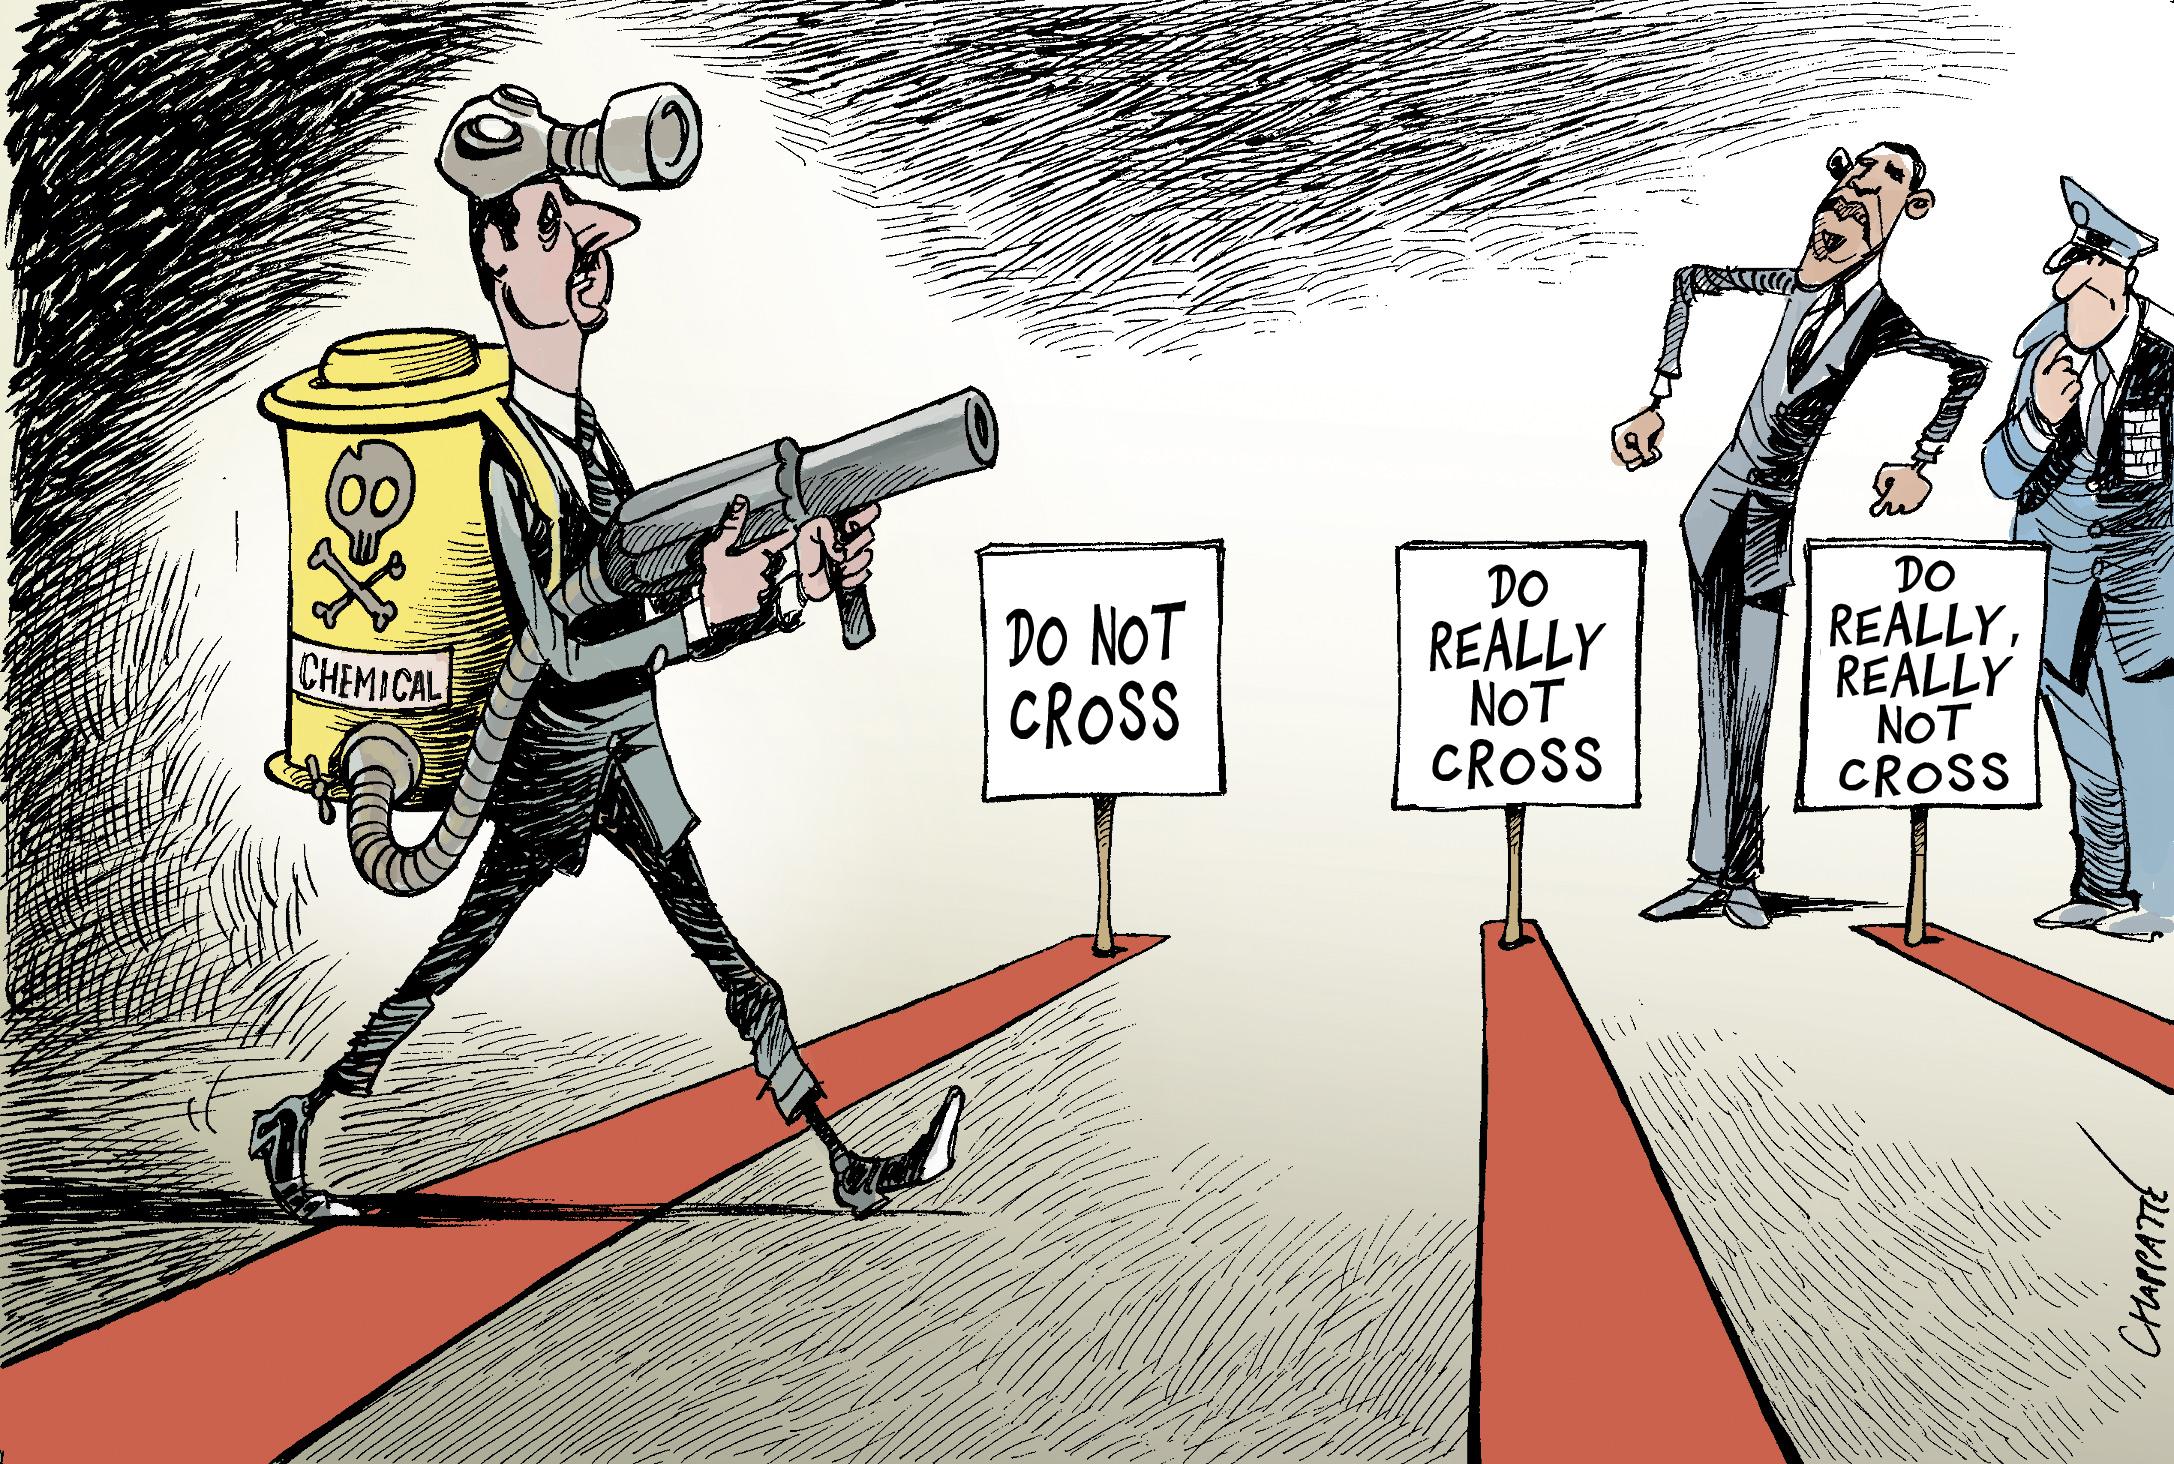 Red lines in Syria